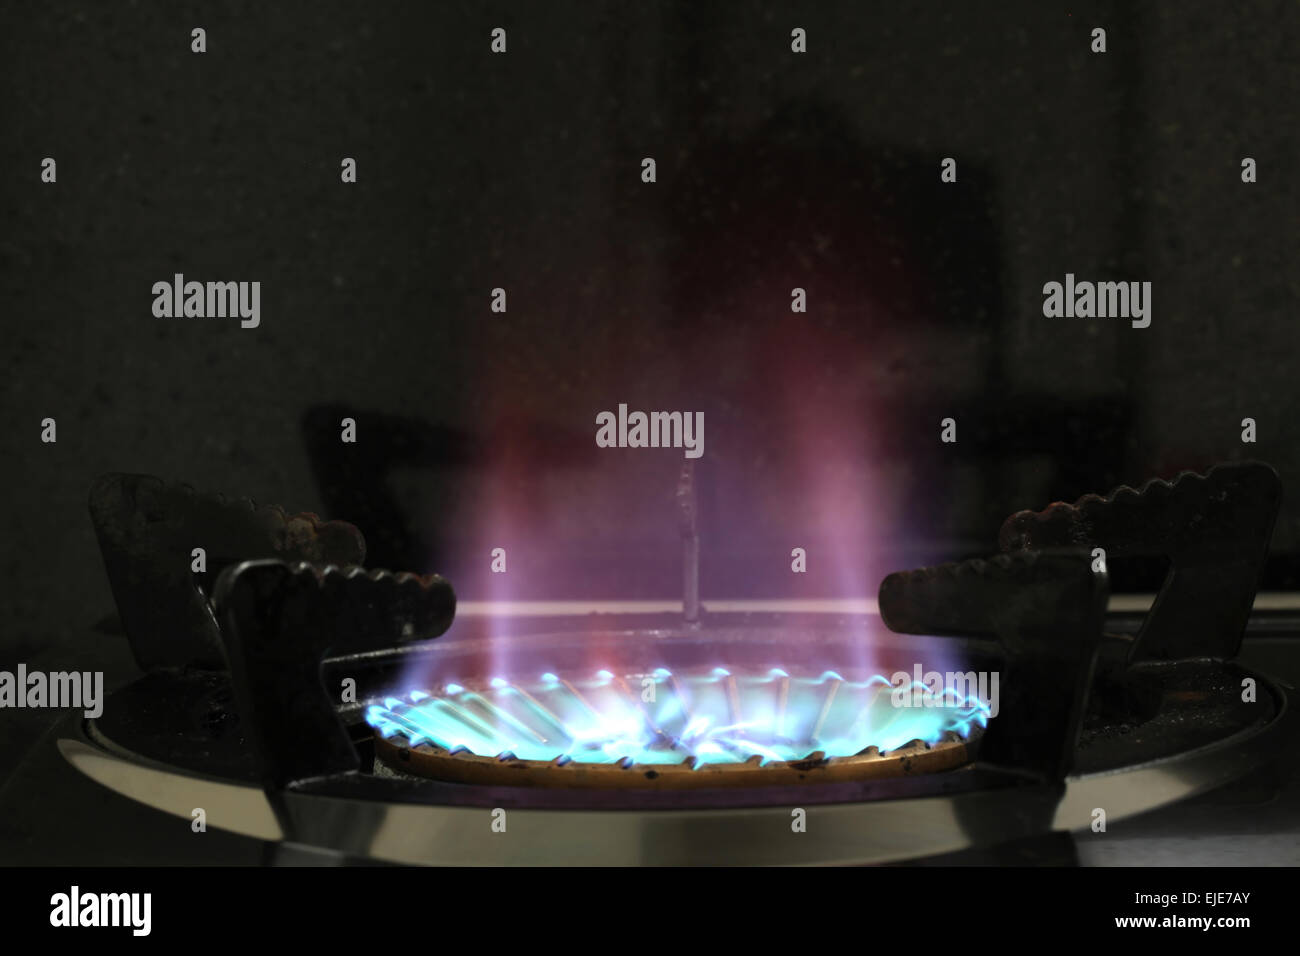 LPG Gas Burner Oven Hob  from a Stove in Kitchen on Black Background Stock Photo